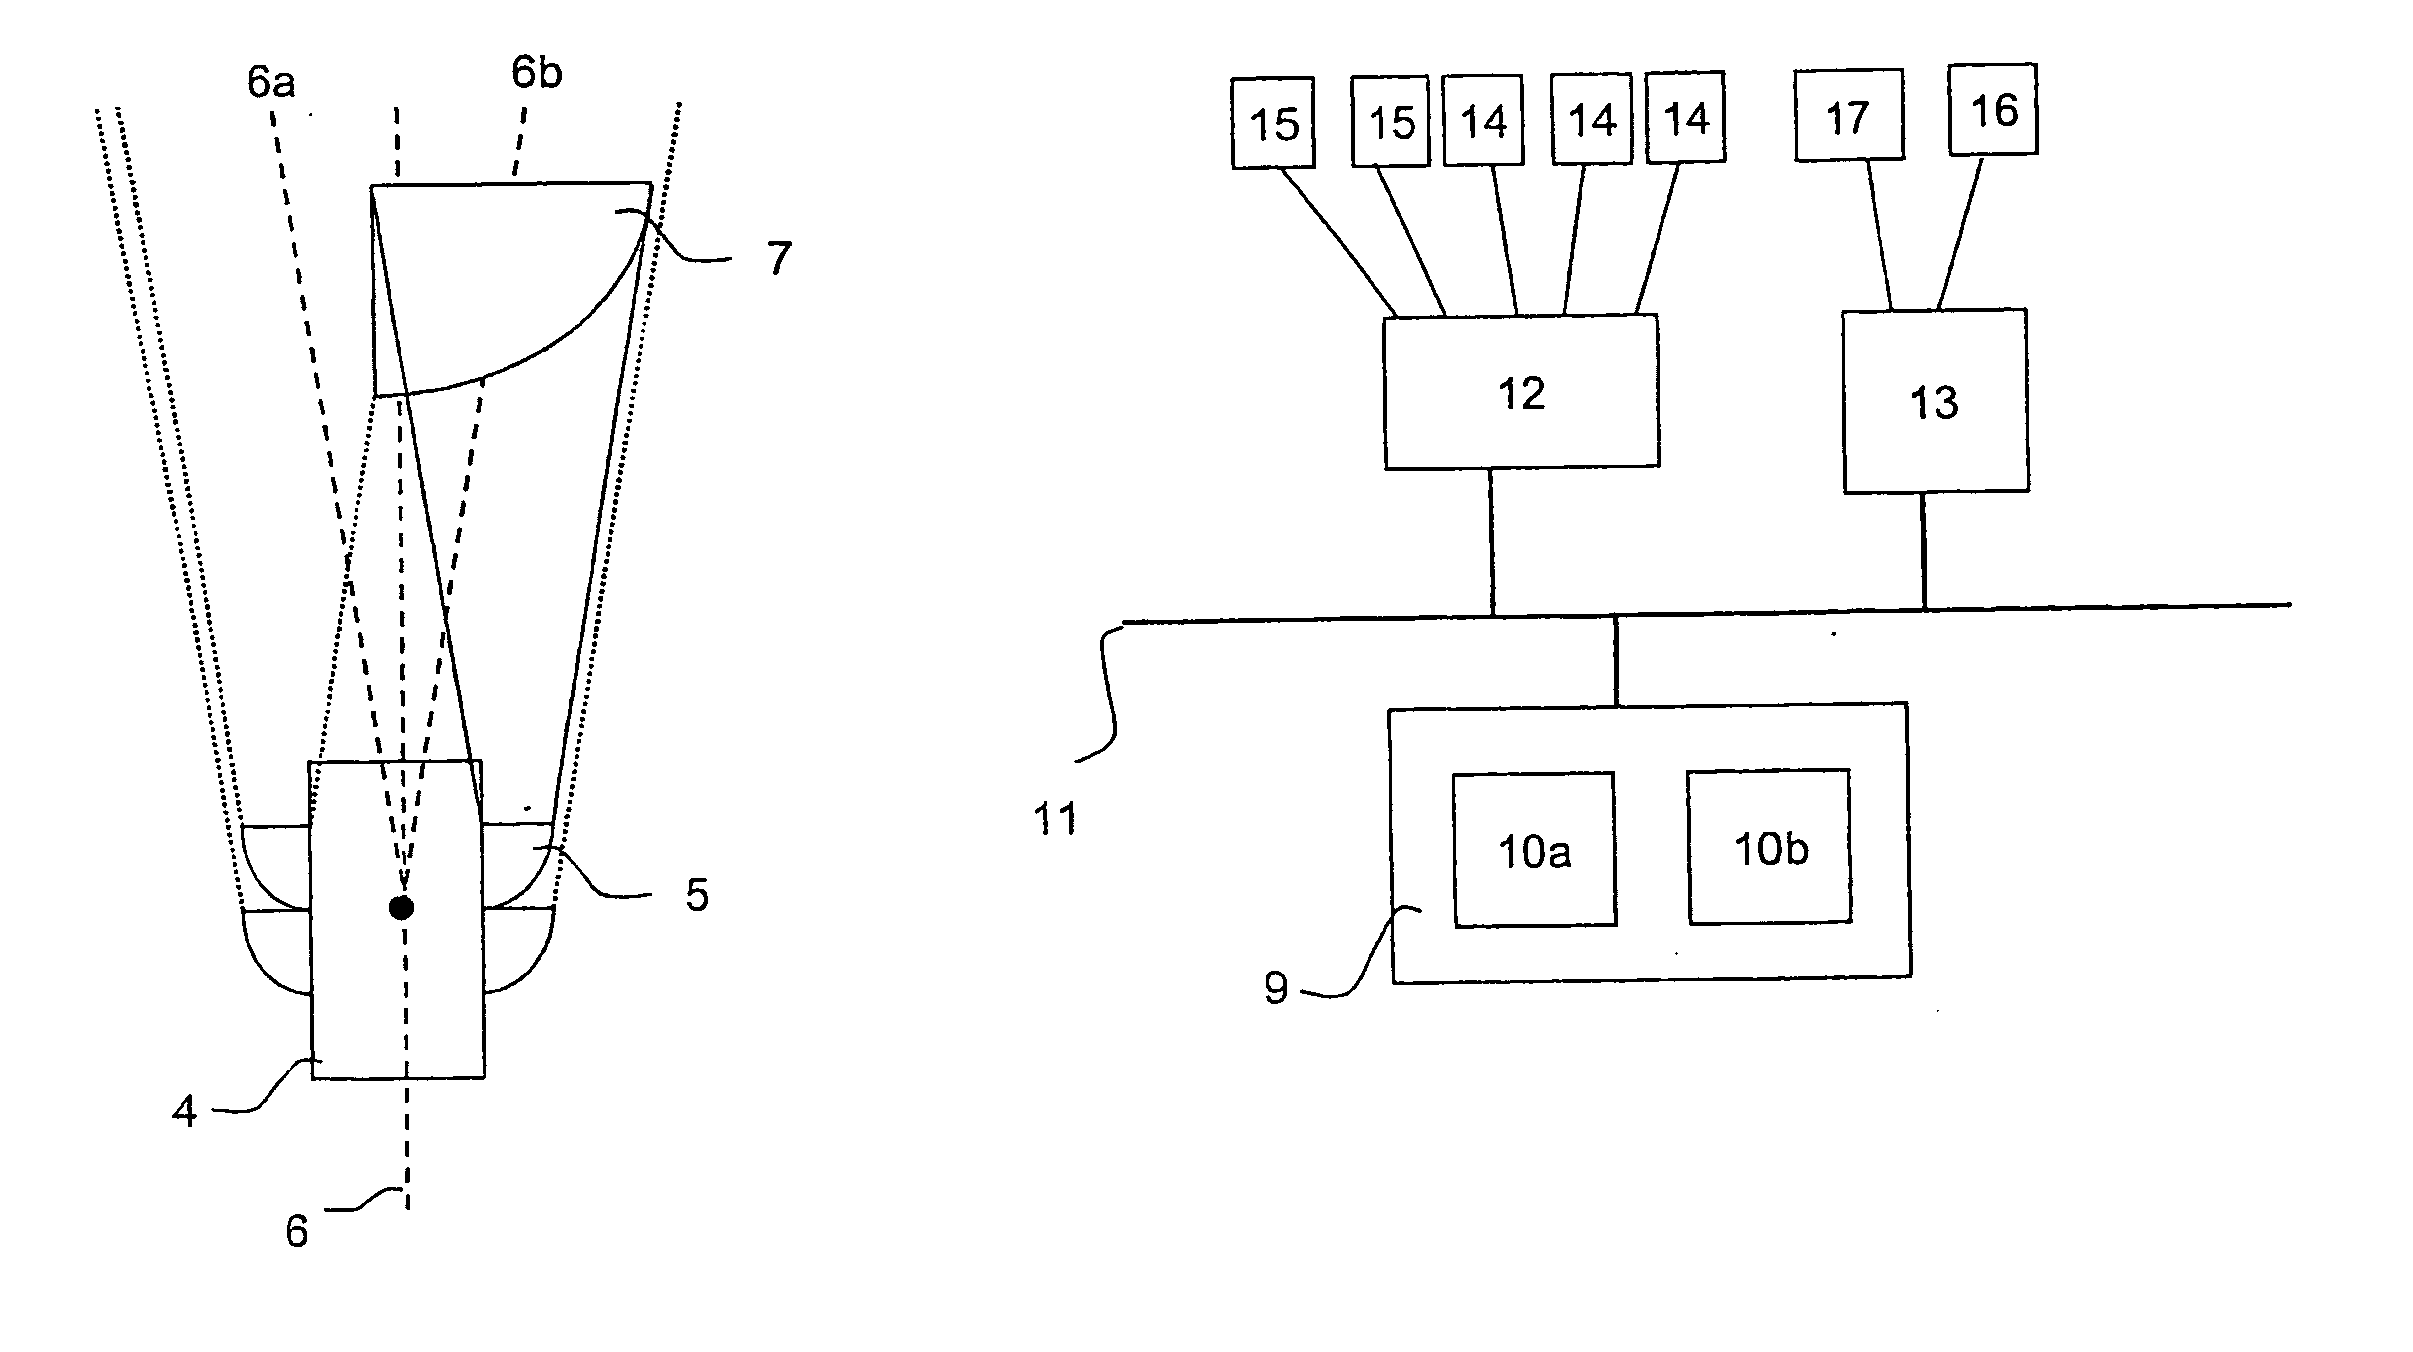 Process and device for avoiding collision while opening vehicle doors